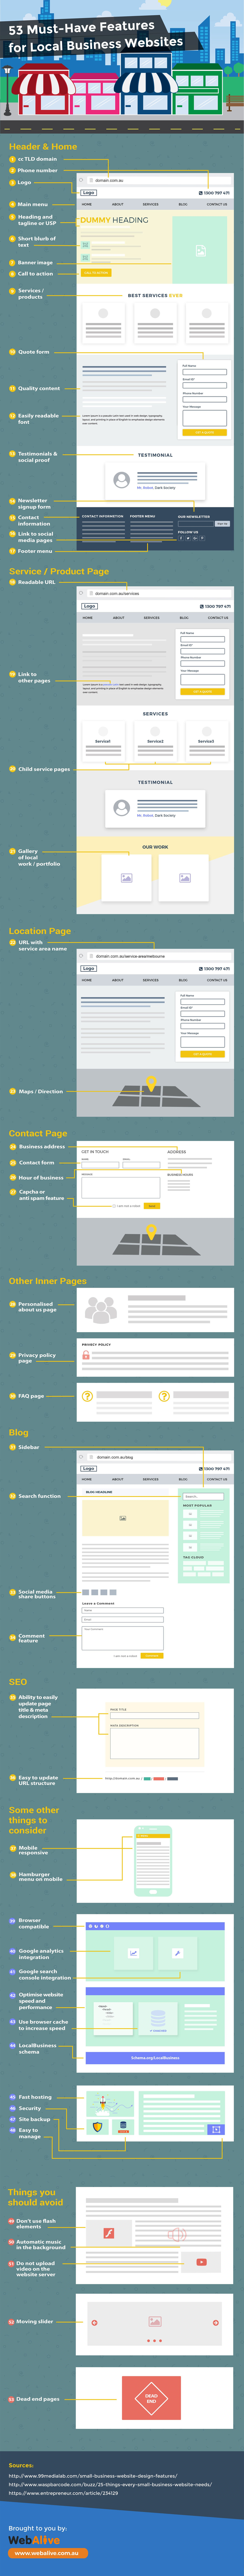 Kelowna-Local-business-website-features-infographic